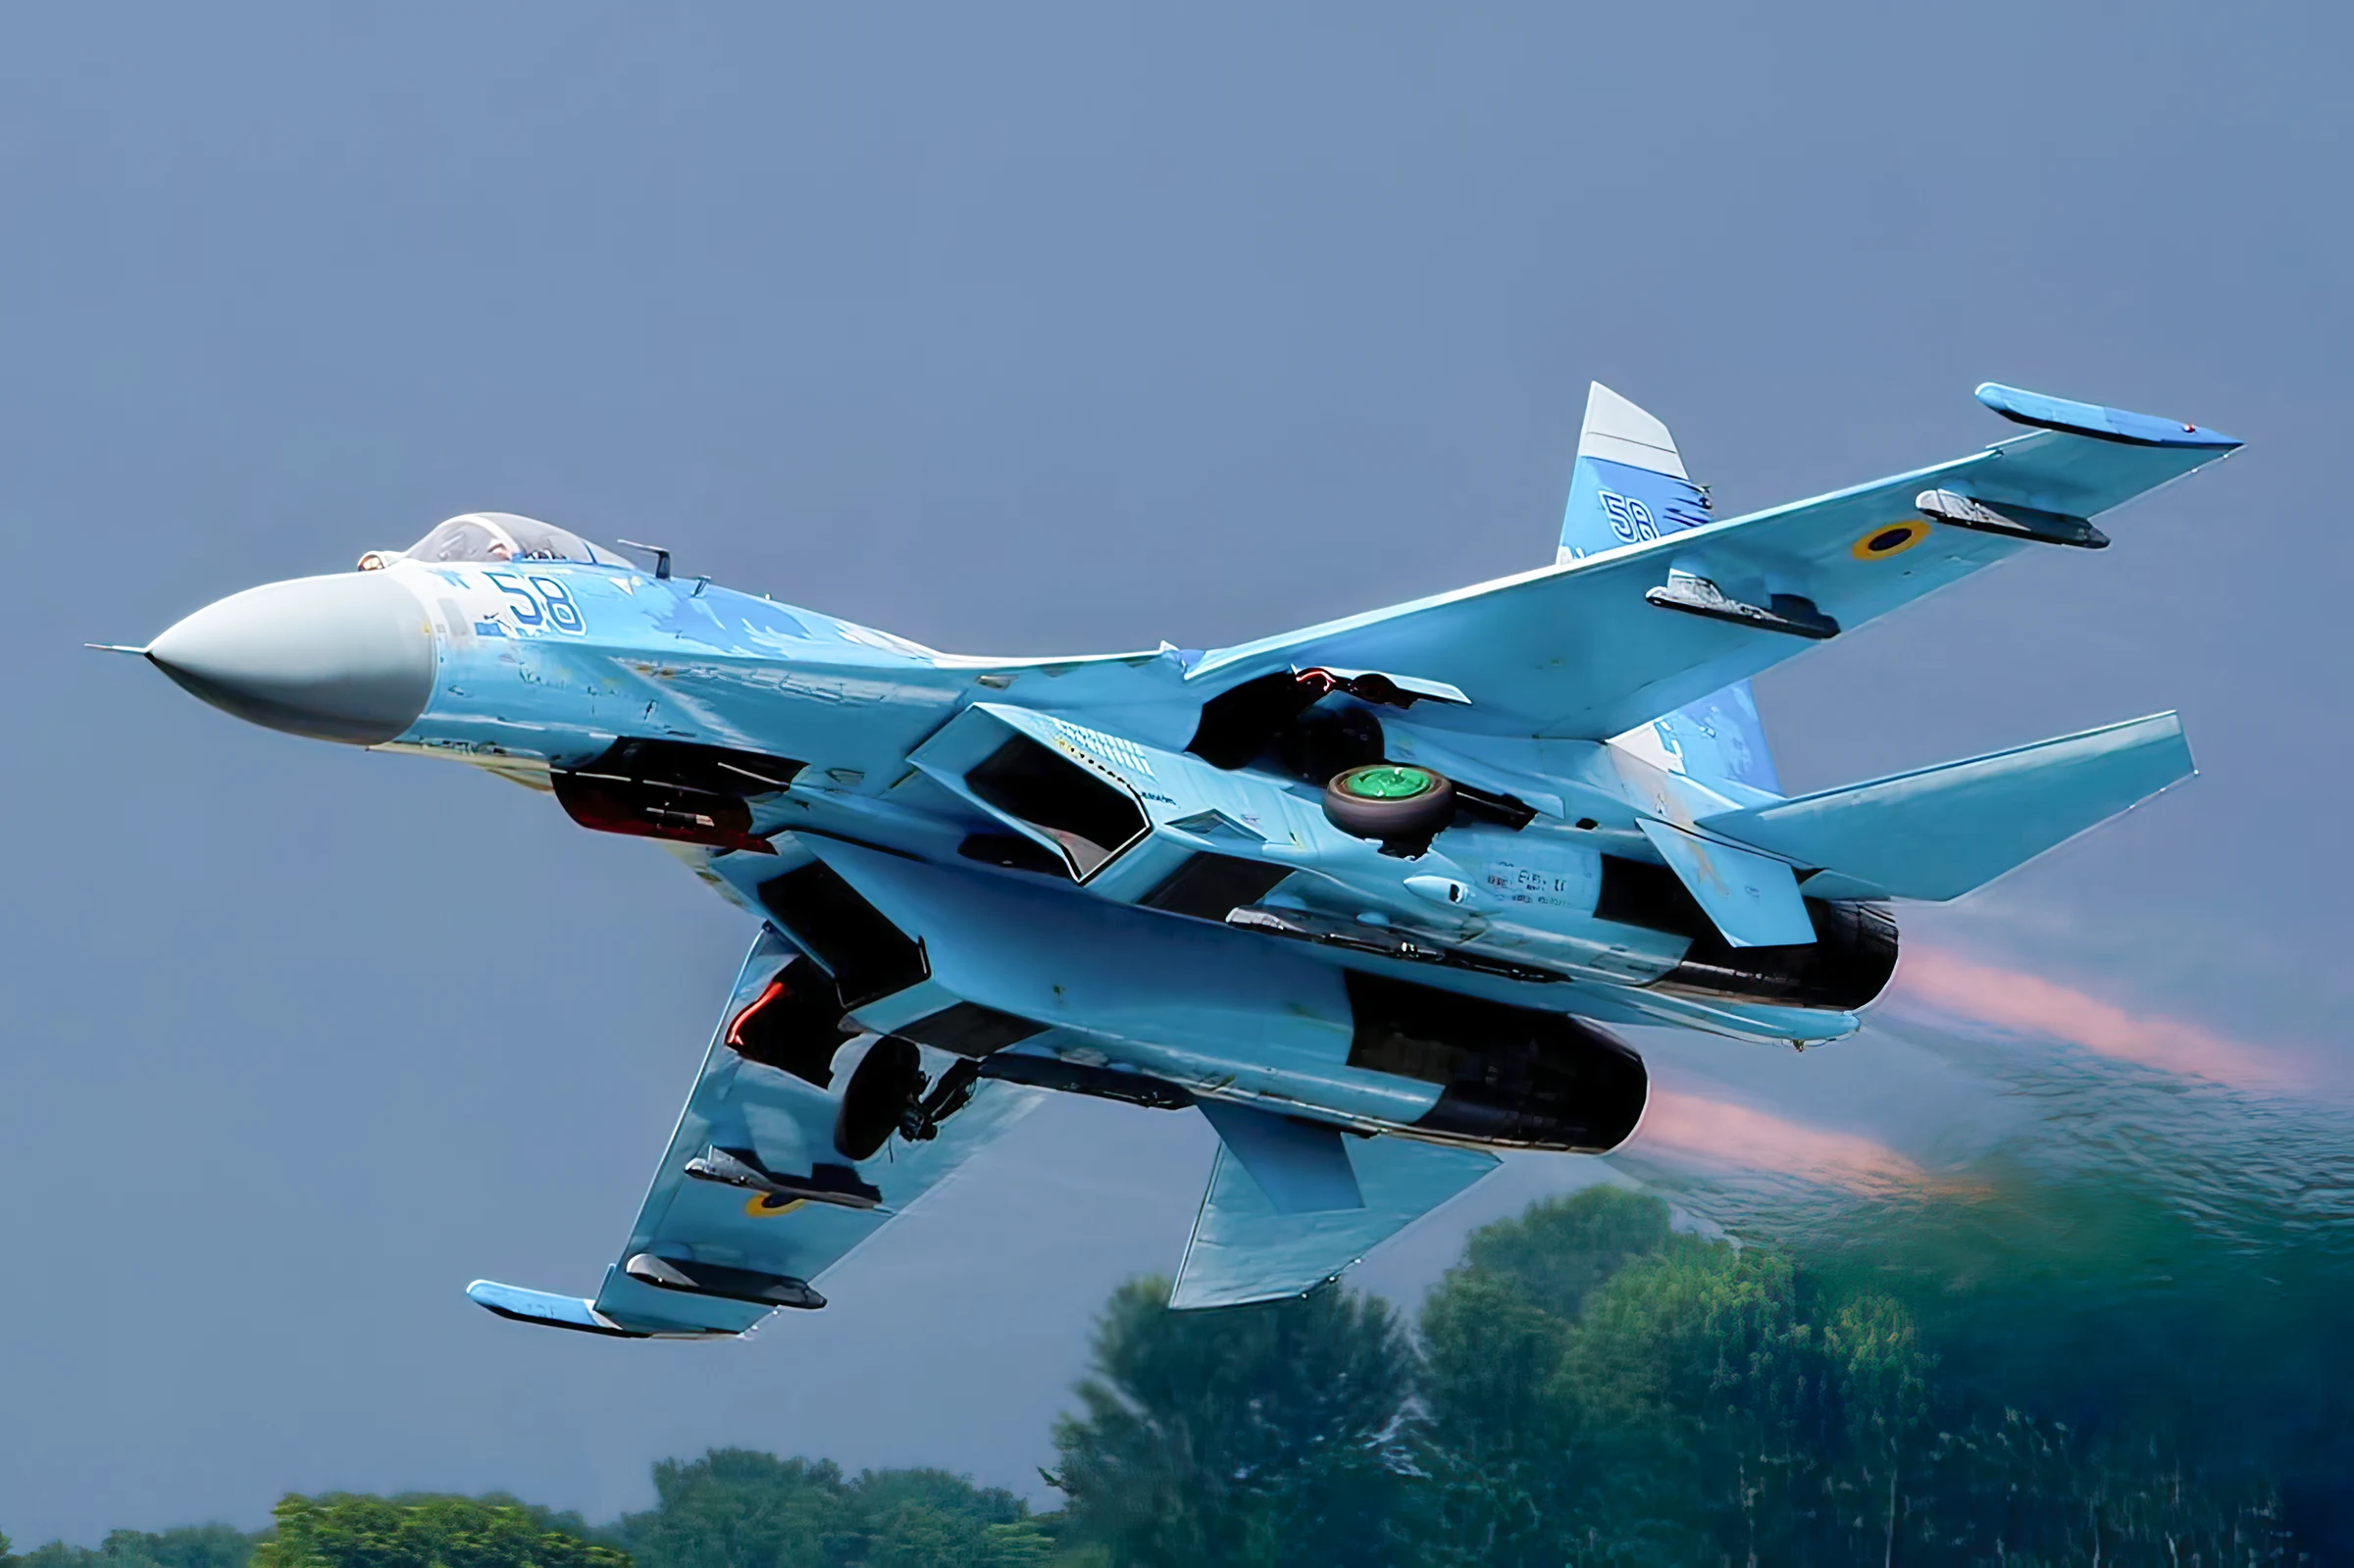 Russian Sukhoi Su-27 Flanker designed to shoot down F-15 fighters